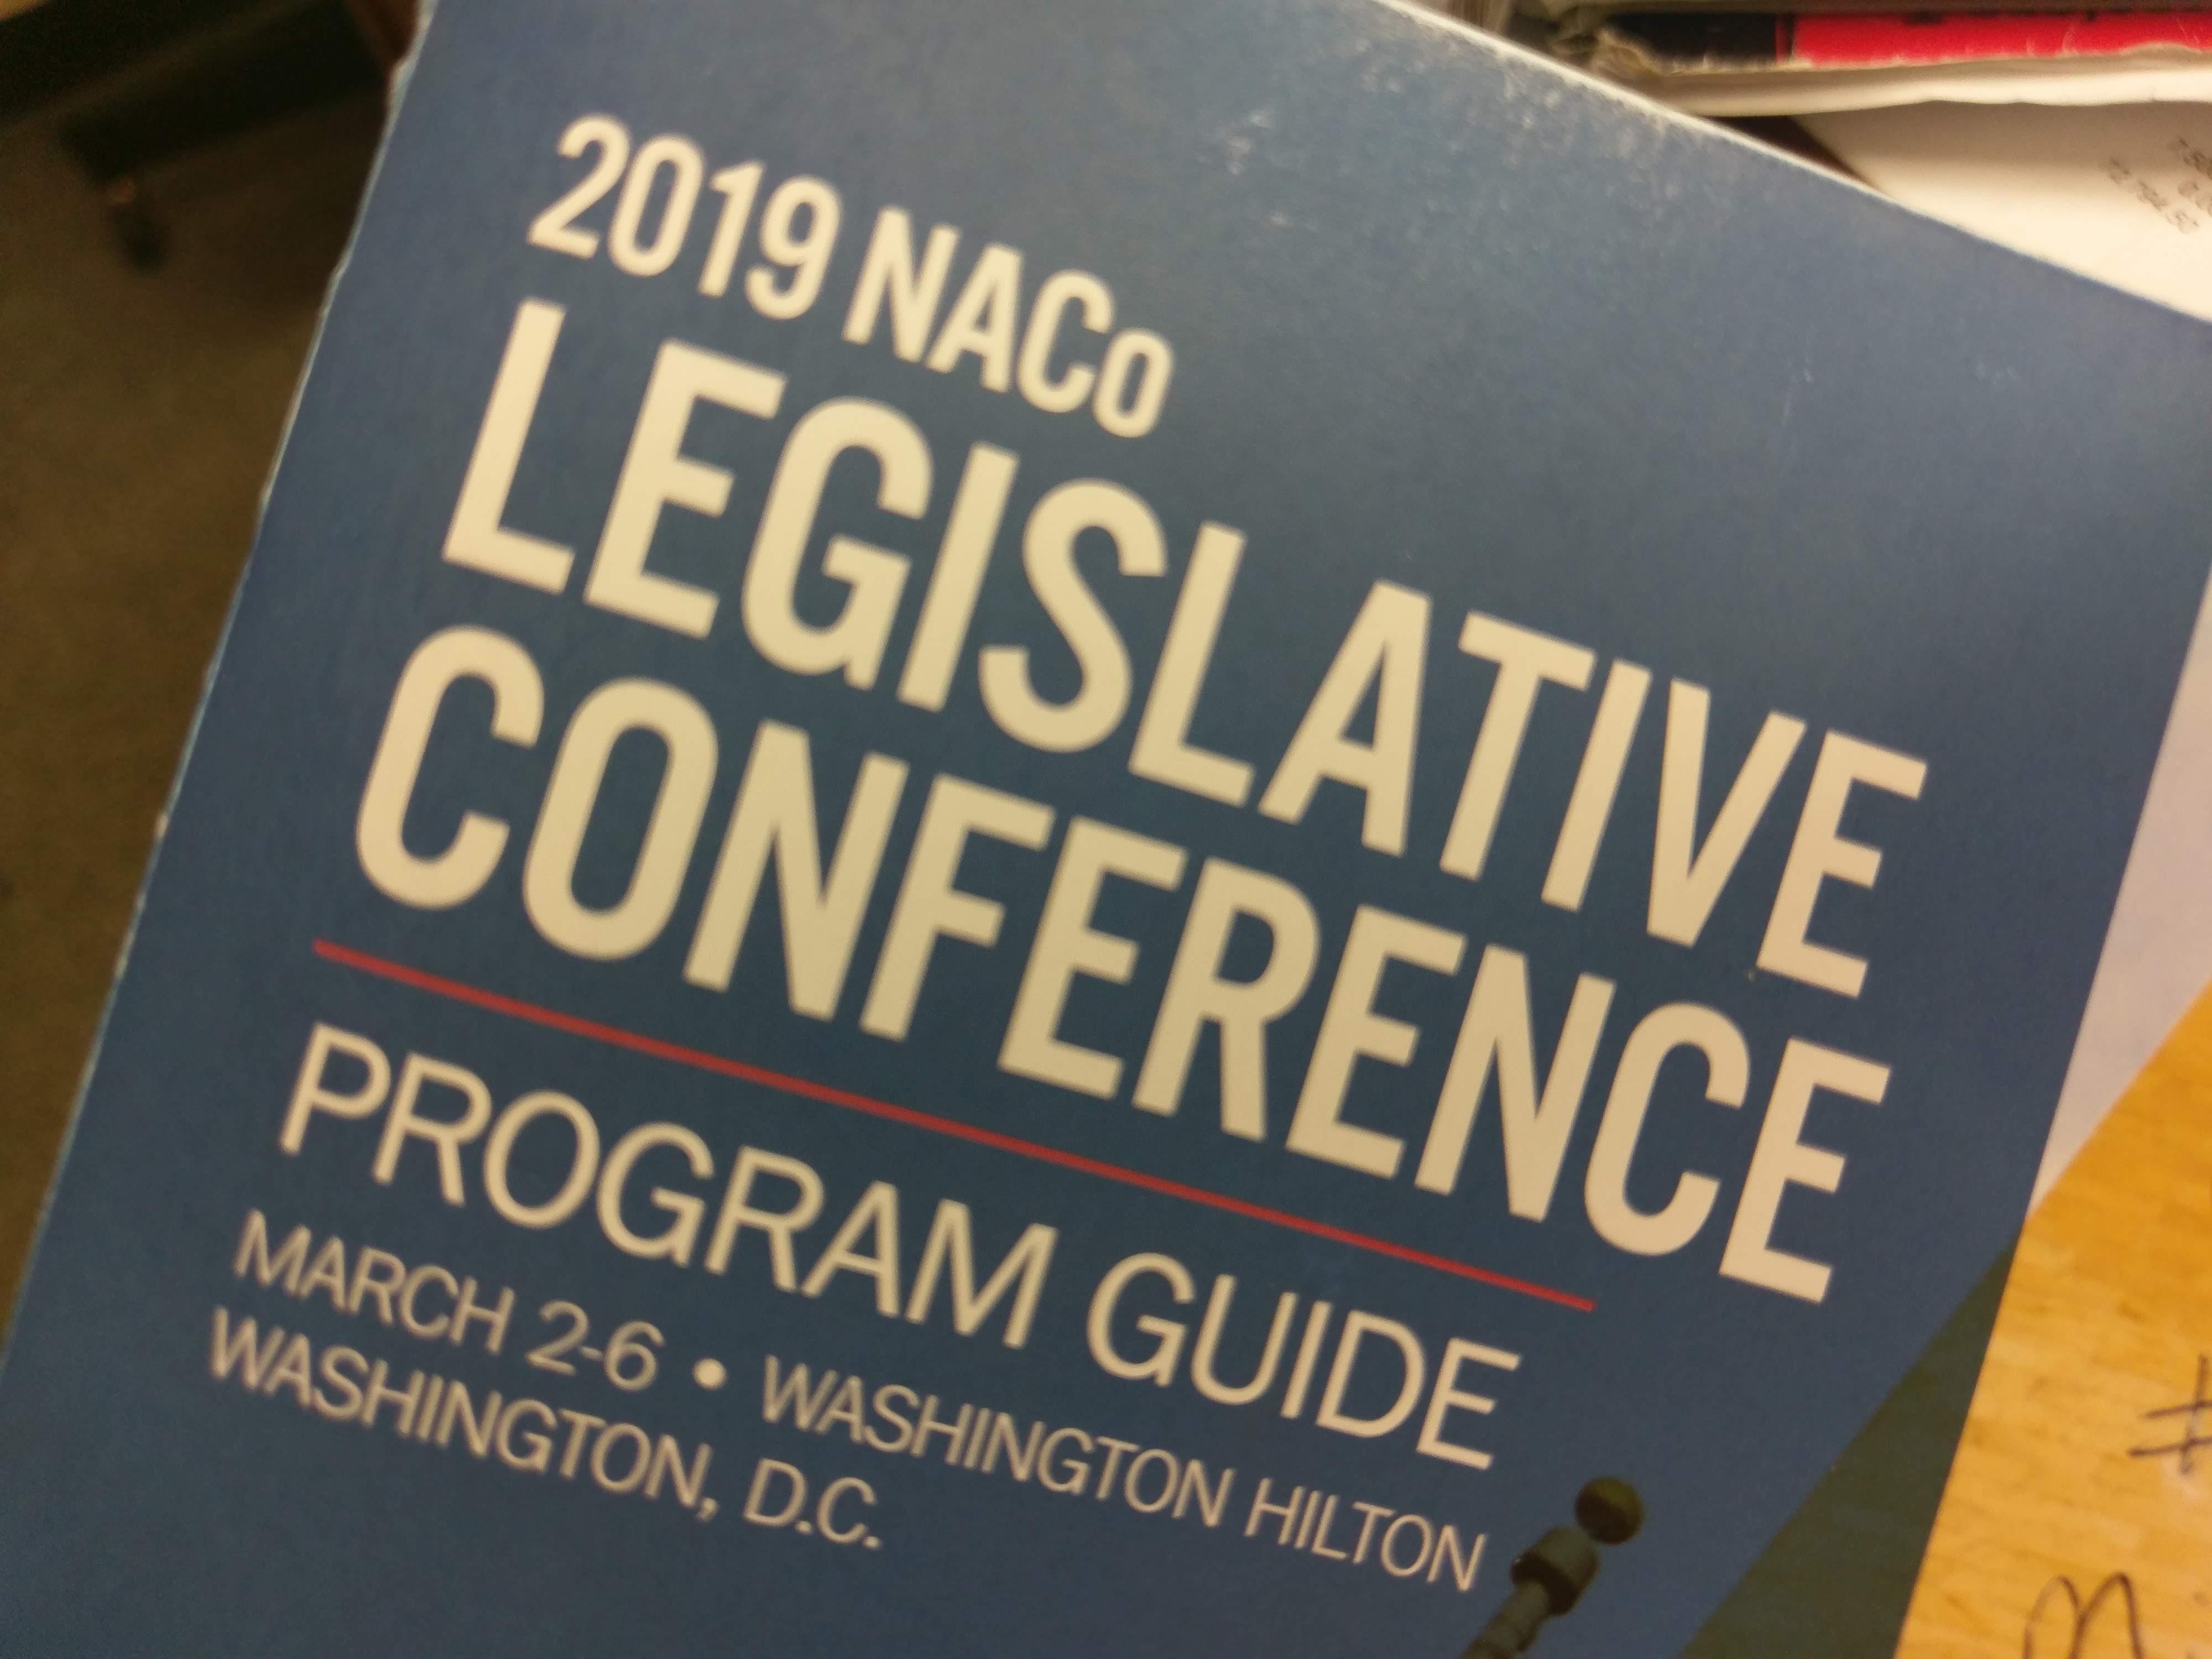 Top Ten Quotes I Heard at the National Association of Counties (NACo) Conference